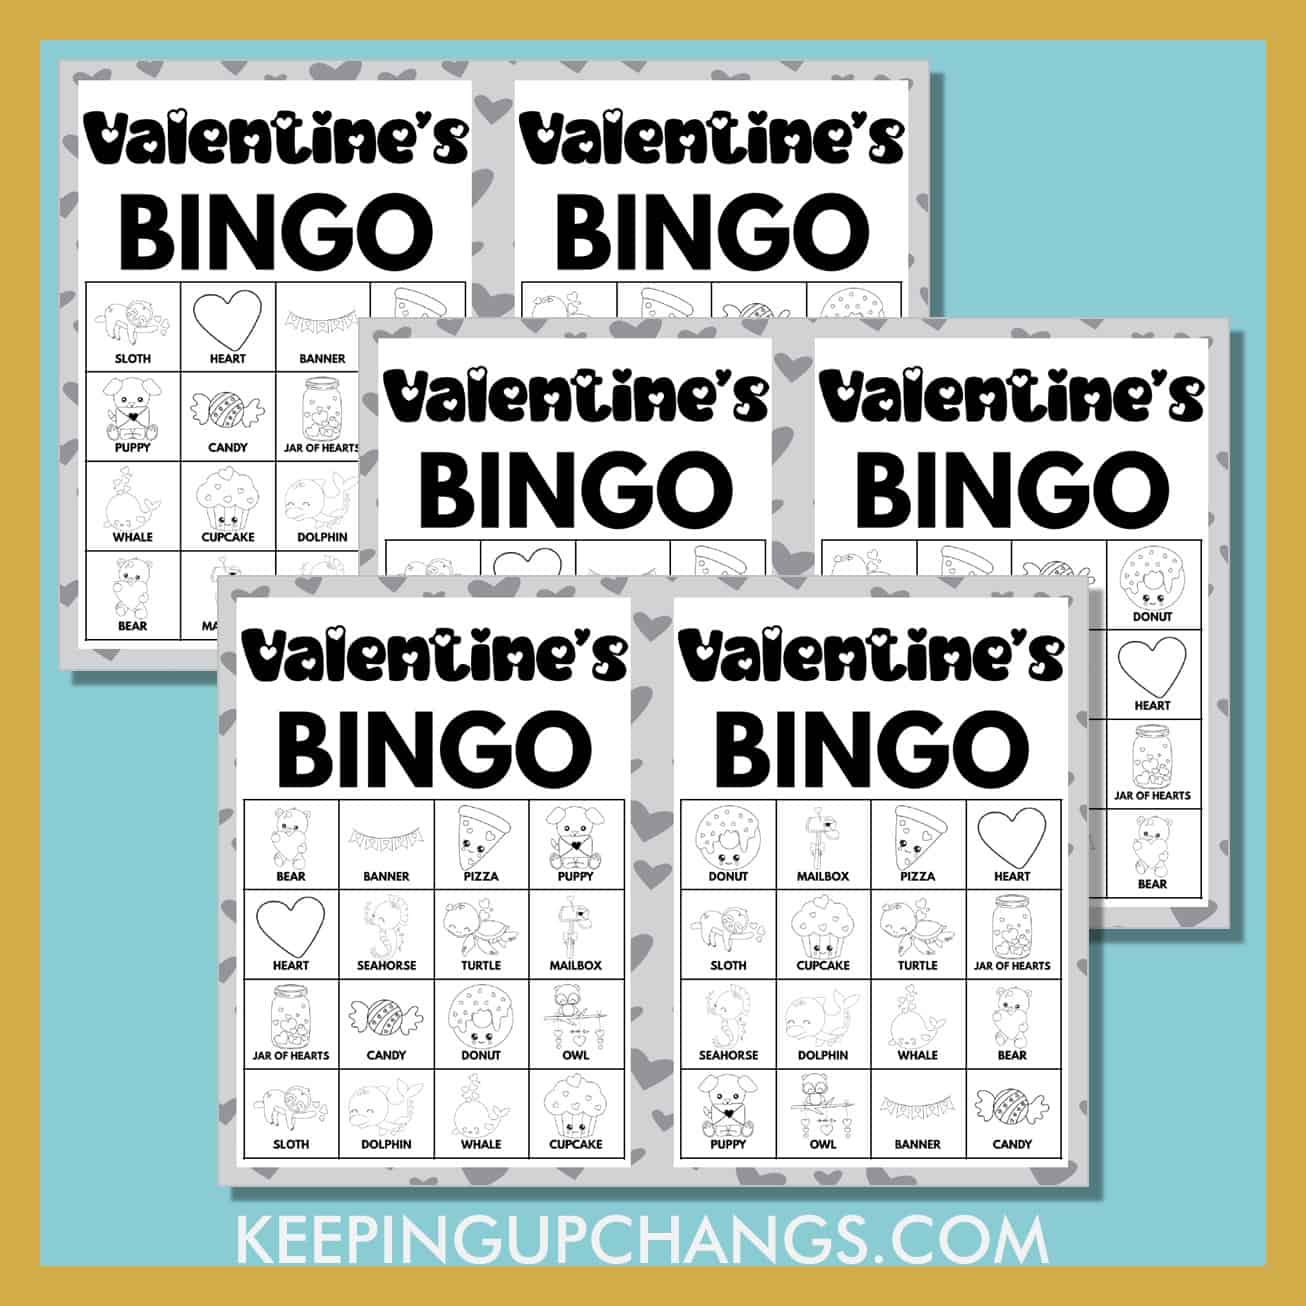 free valentine's bingo cards 4x4 black white coloring for party, school, group.